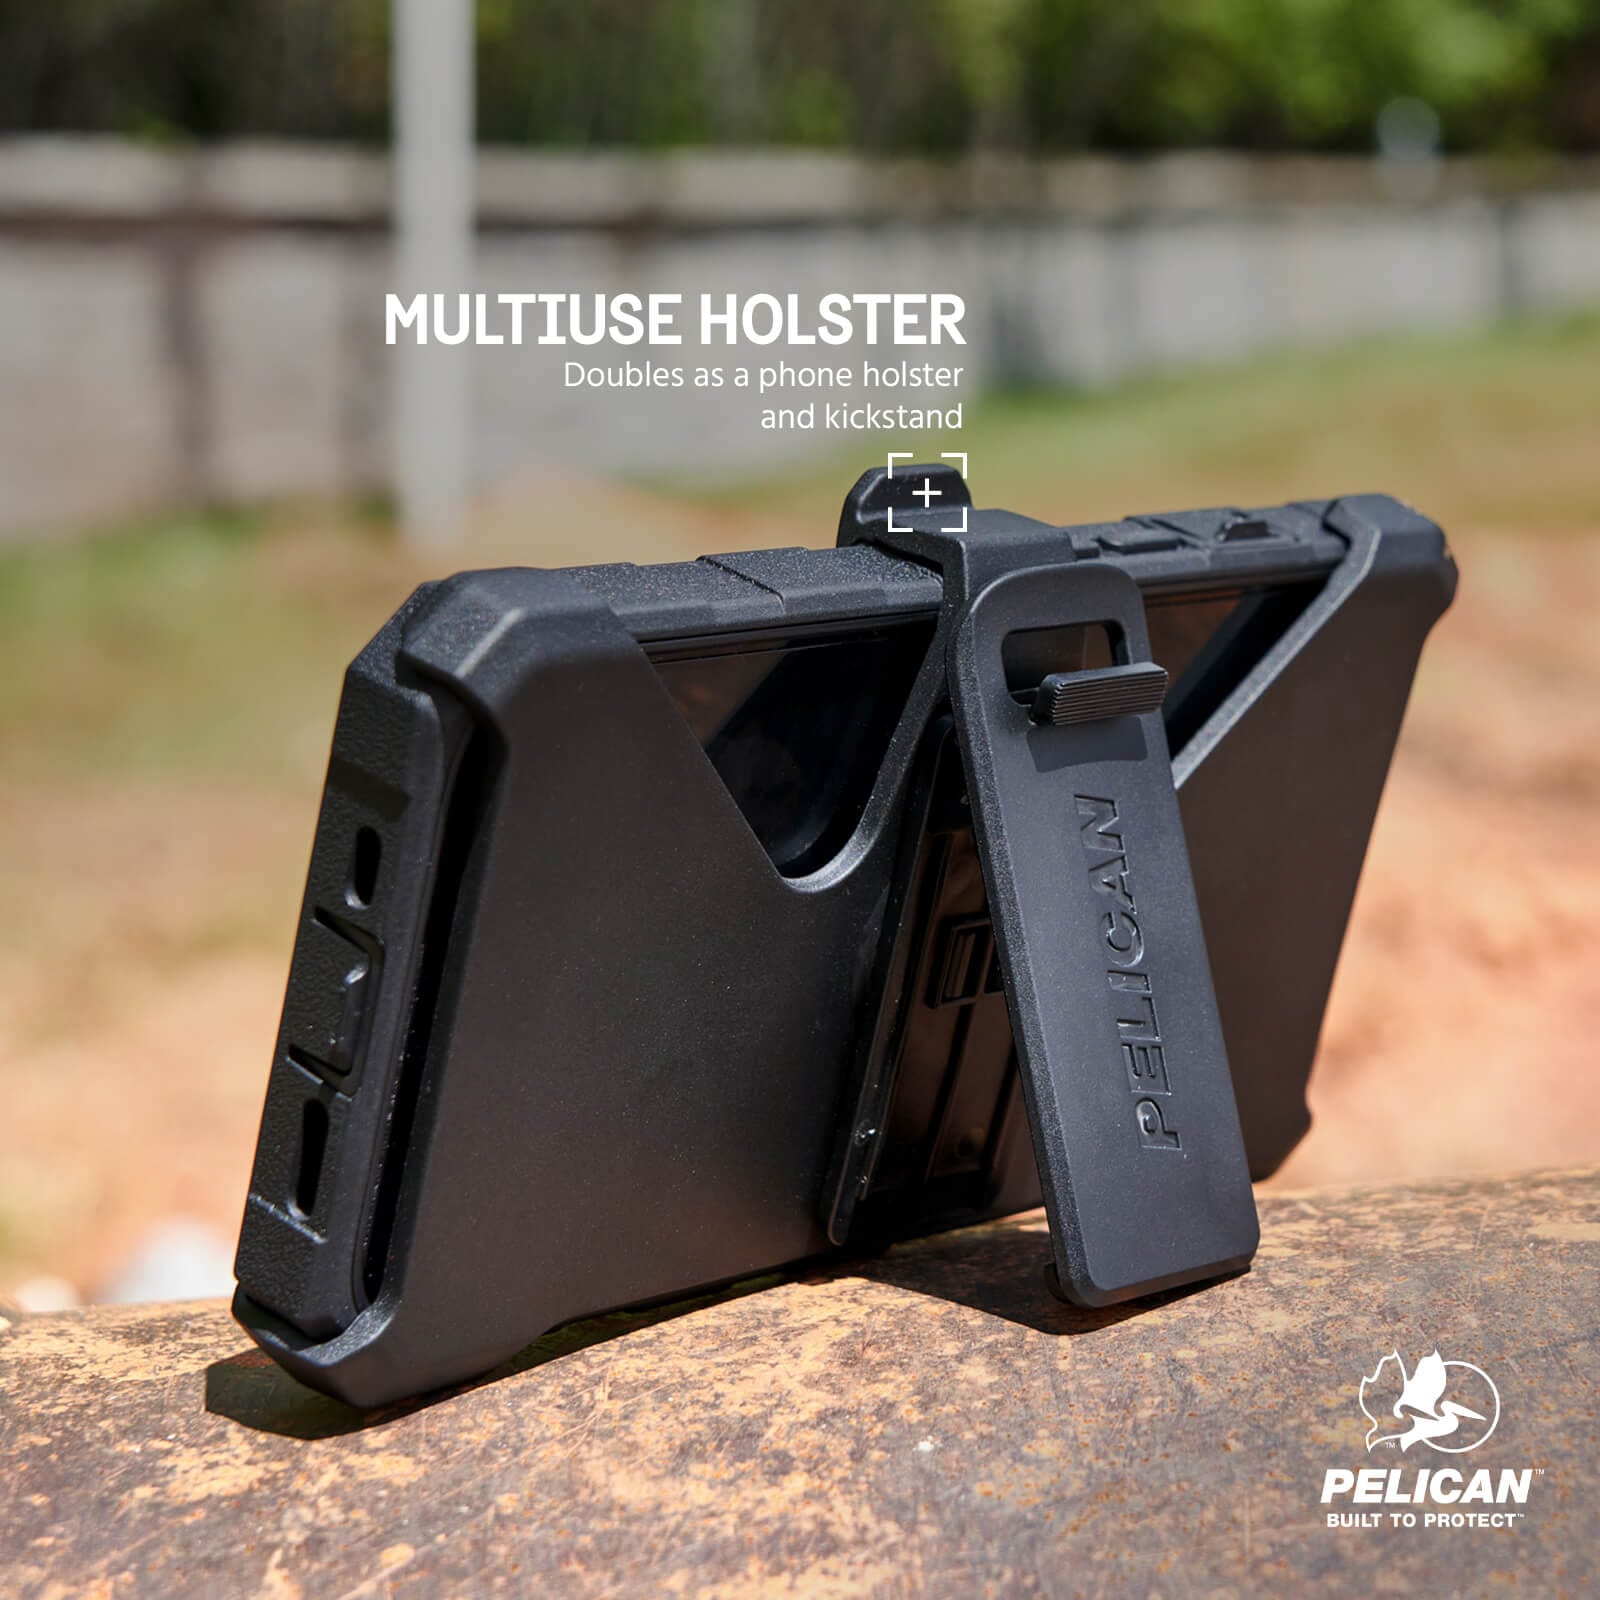 MULTI USE HOLSTER. DOUBLES AS A PHONE HOLSTER AND KICKSTAND